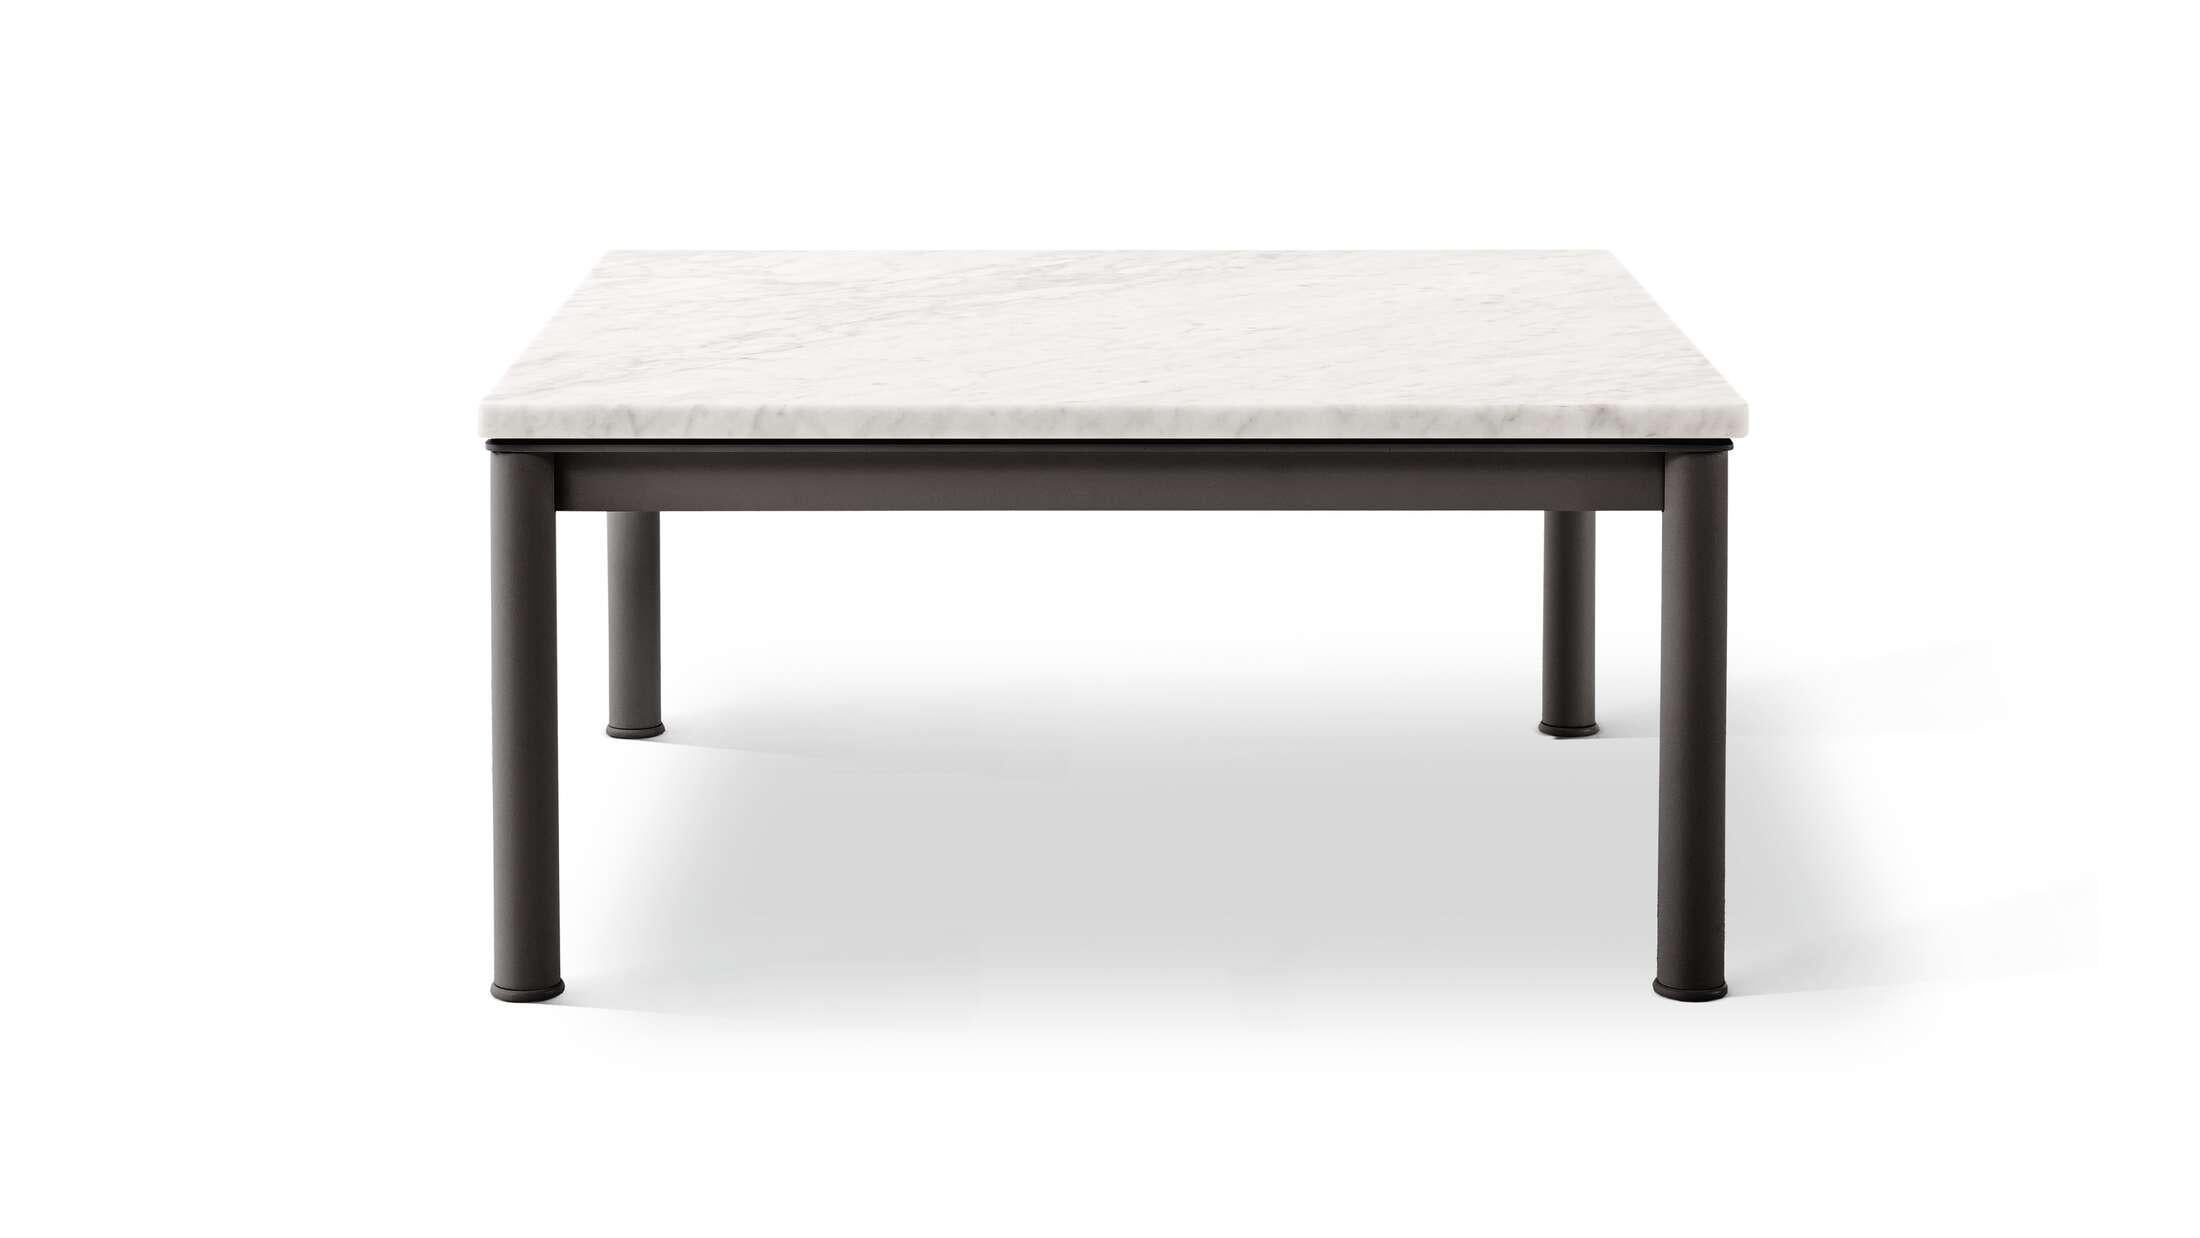 The price given applies to the table as shown in the first picture. Prices vary dependent on the material and size of the table. The collection includes a dining table as well as low tables, both in a square and rectangular formats. The first